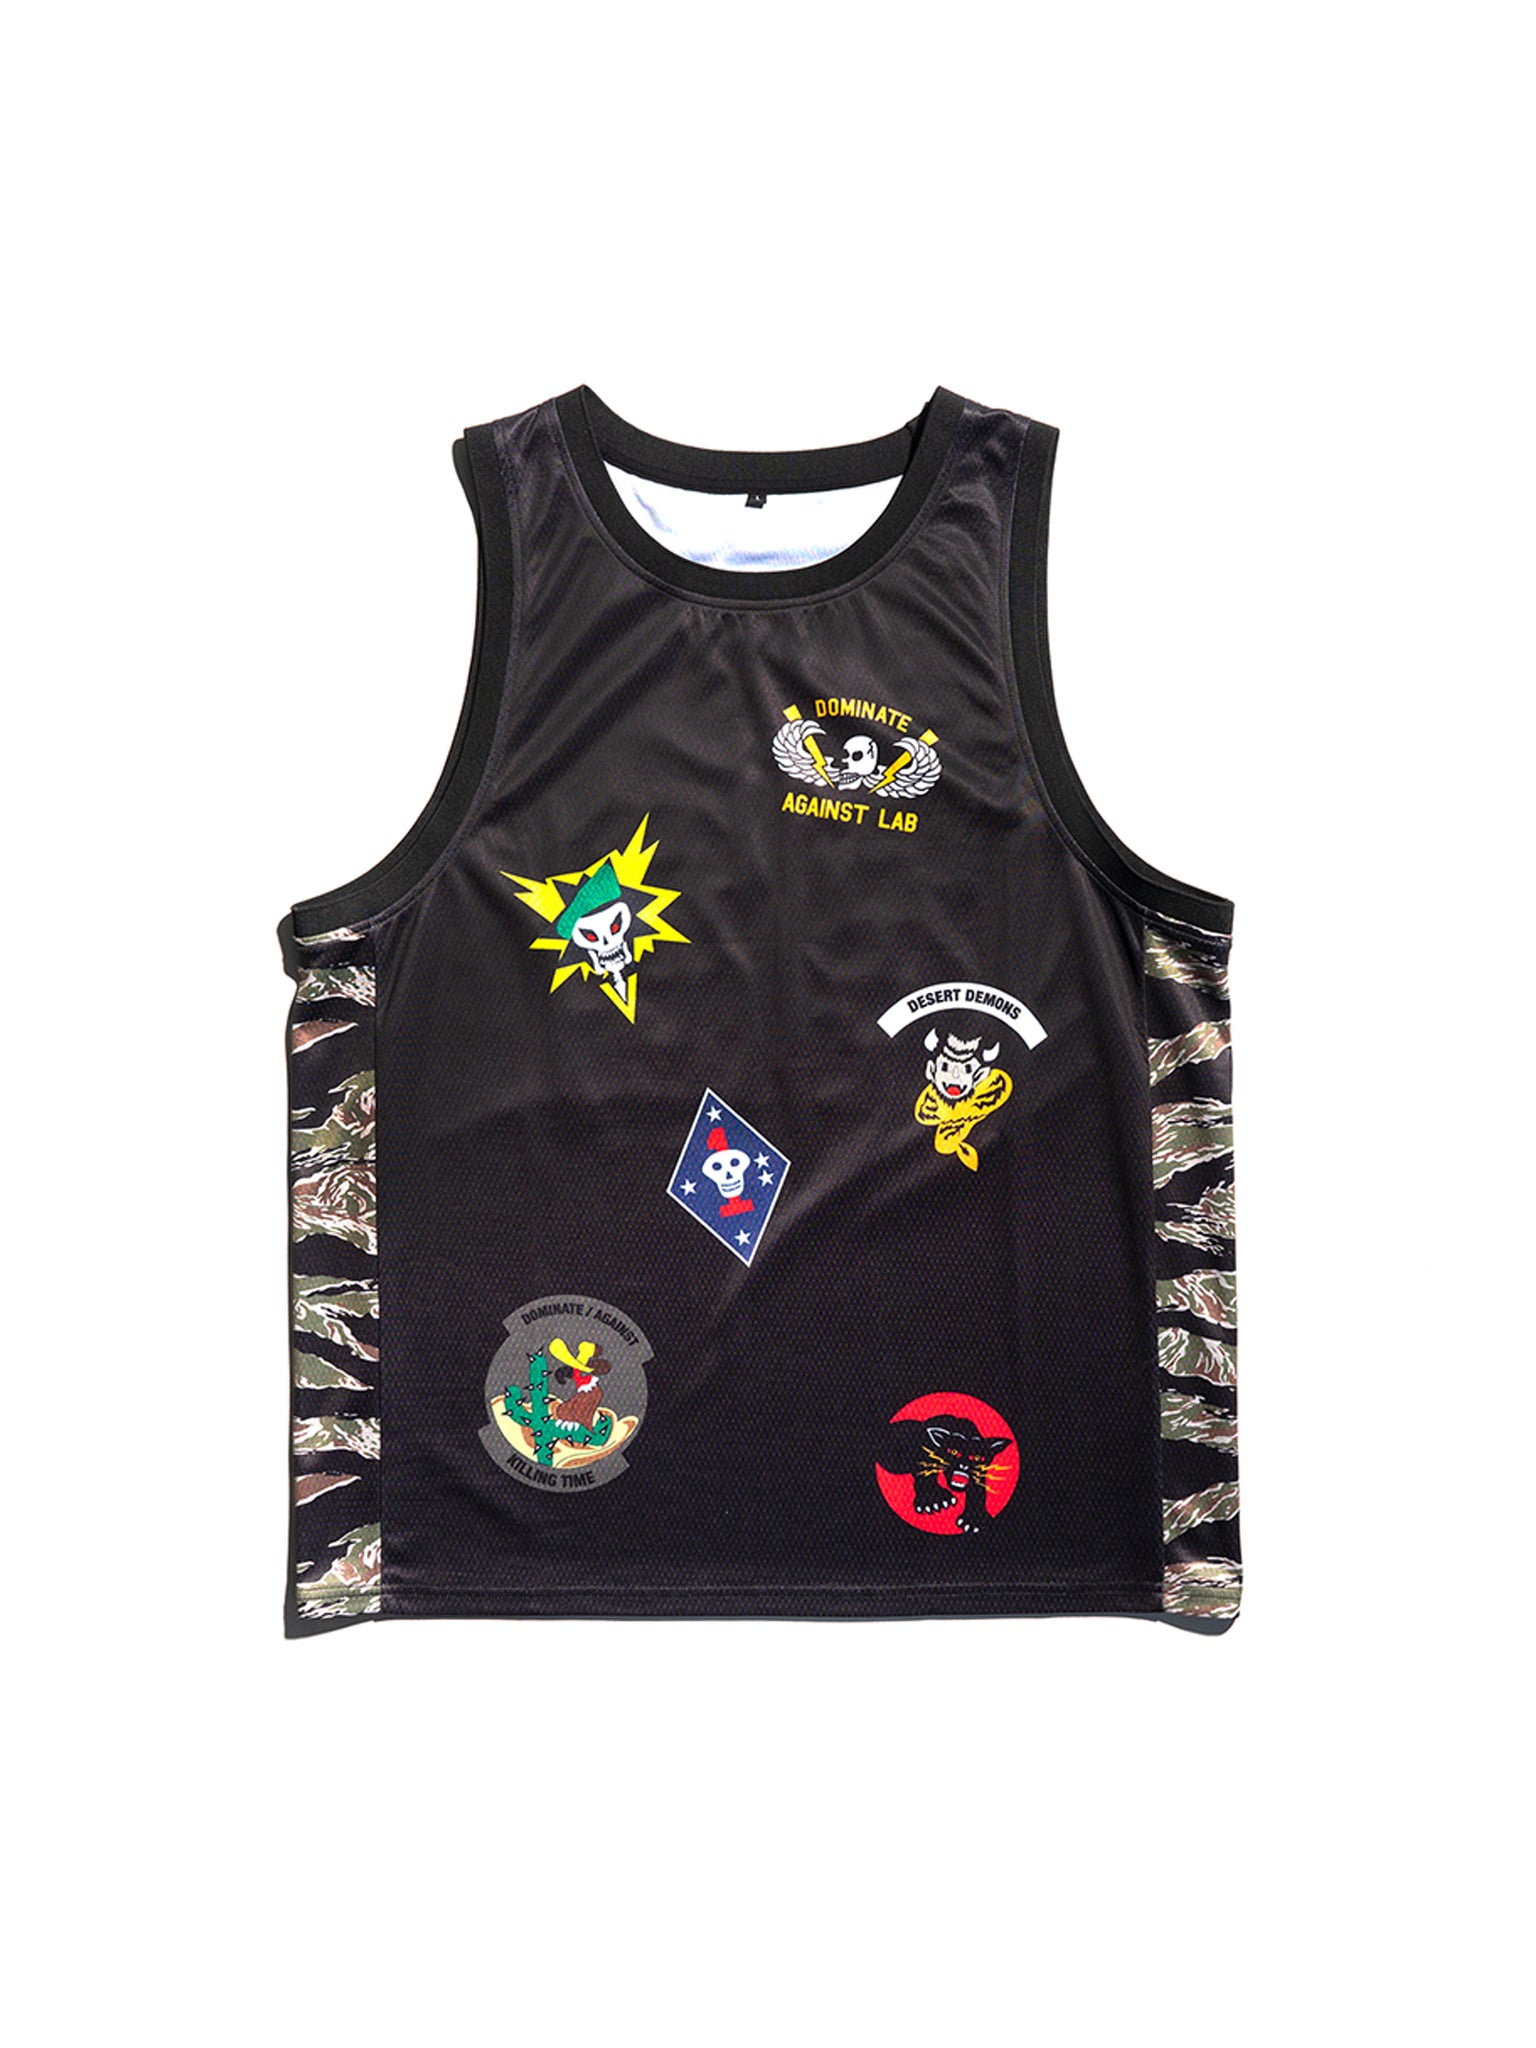 AGAINST X DOMINATE PATCH MESH JERSEY